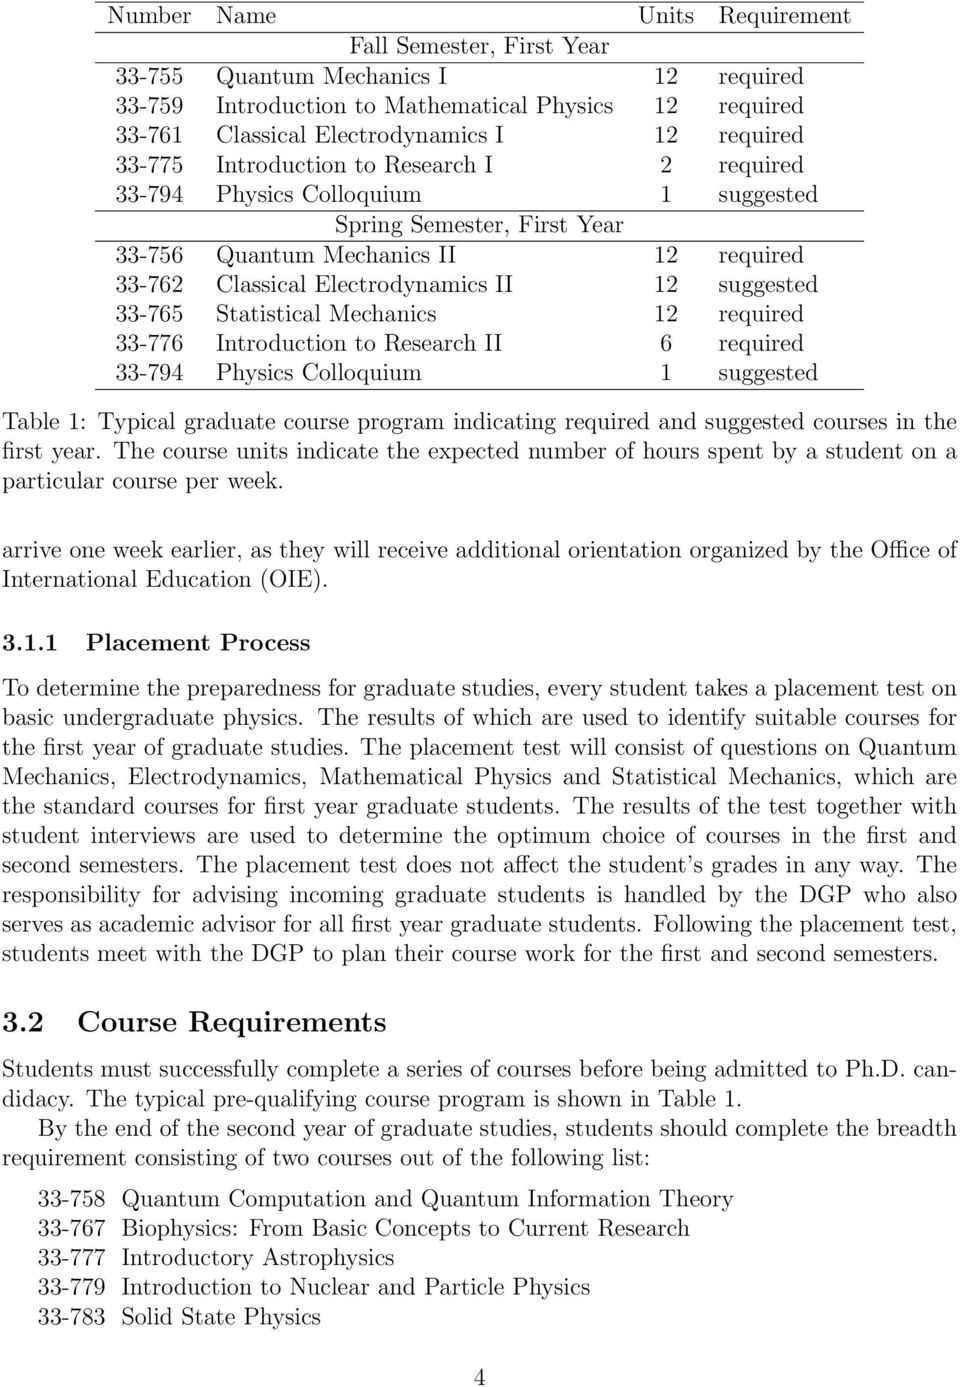 33-765 Statistical Mechanics 12 required 33-776 Introduction to Research II 6 required 33-794 Physics Colloquium 1 suggested Table 1: Typical graduate course program indicating required and suggested